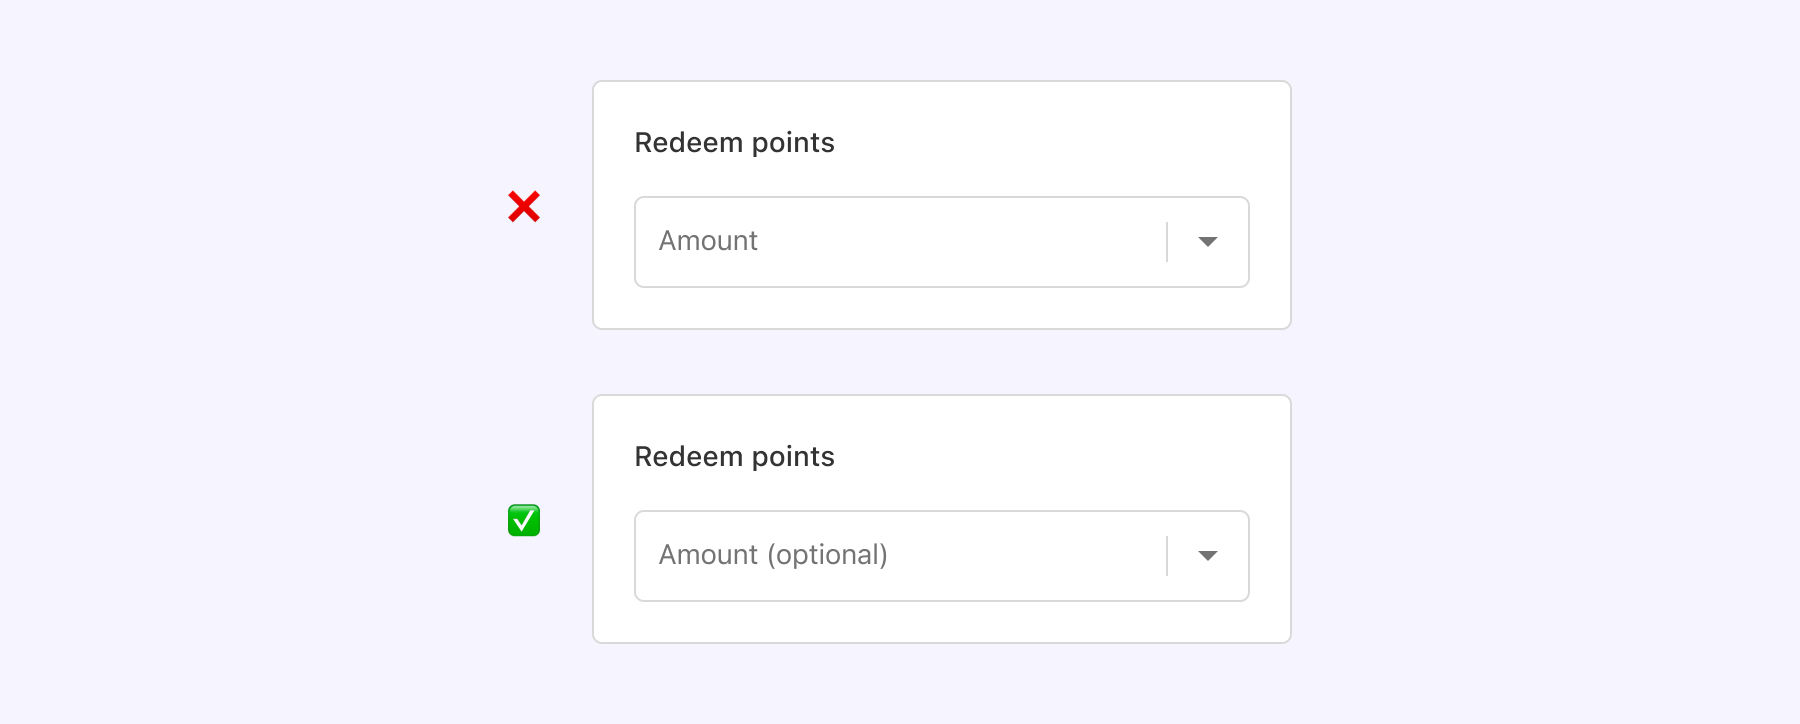 An example of marking a field to Redeem points as optional